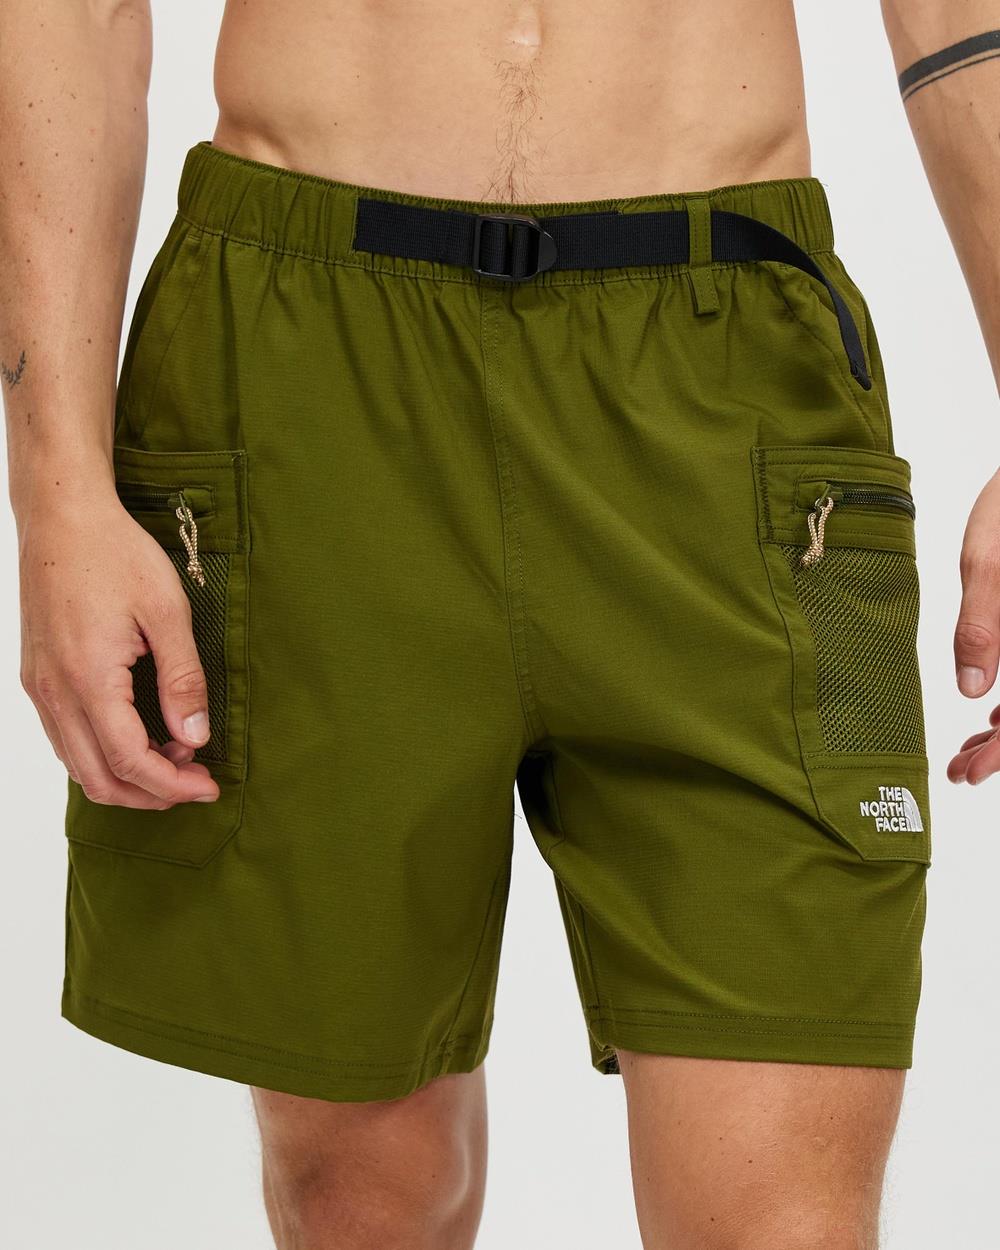 The North Face - Class V Pathfinder Belt Shorts - Shorts (Forest Olive) Class V Pathfinder Belt Shorts